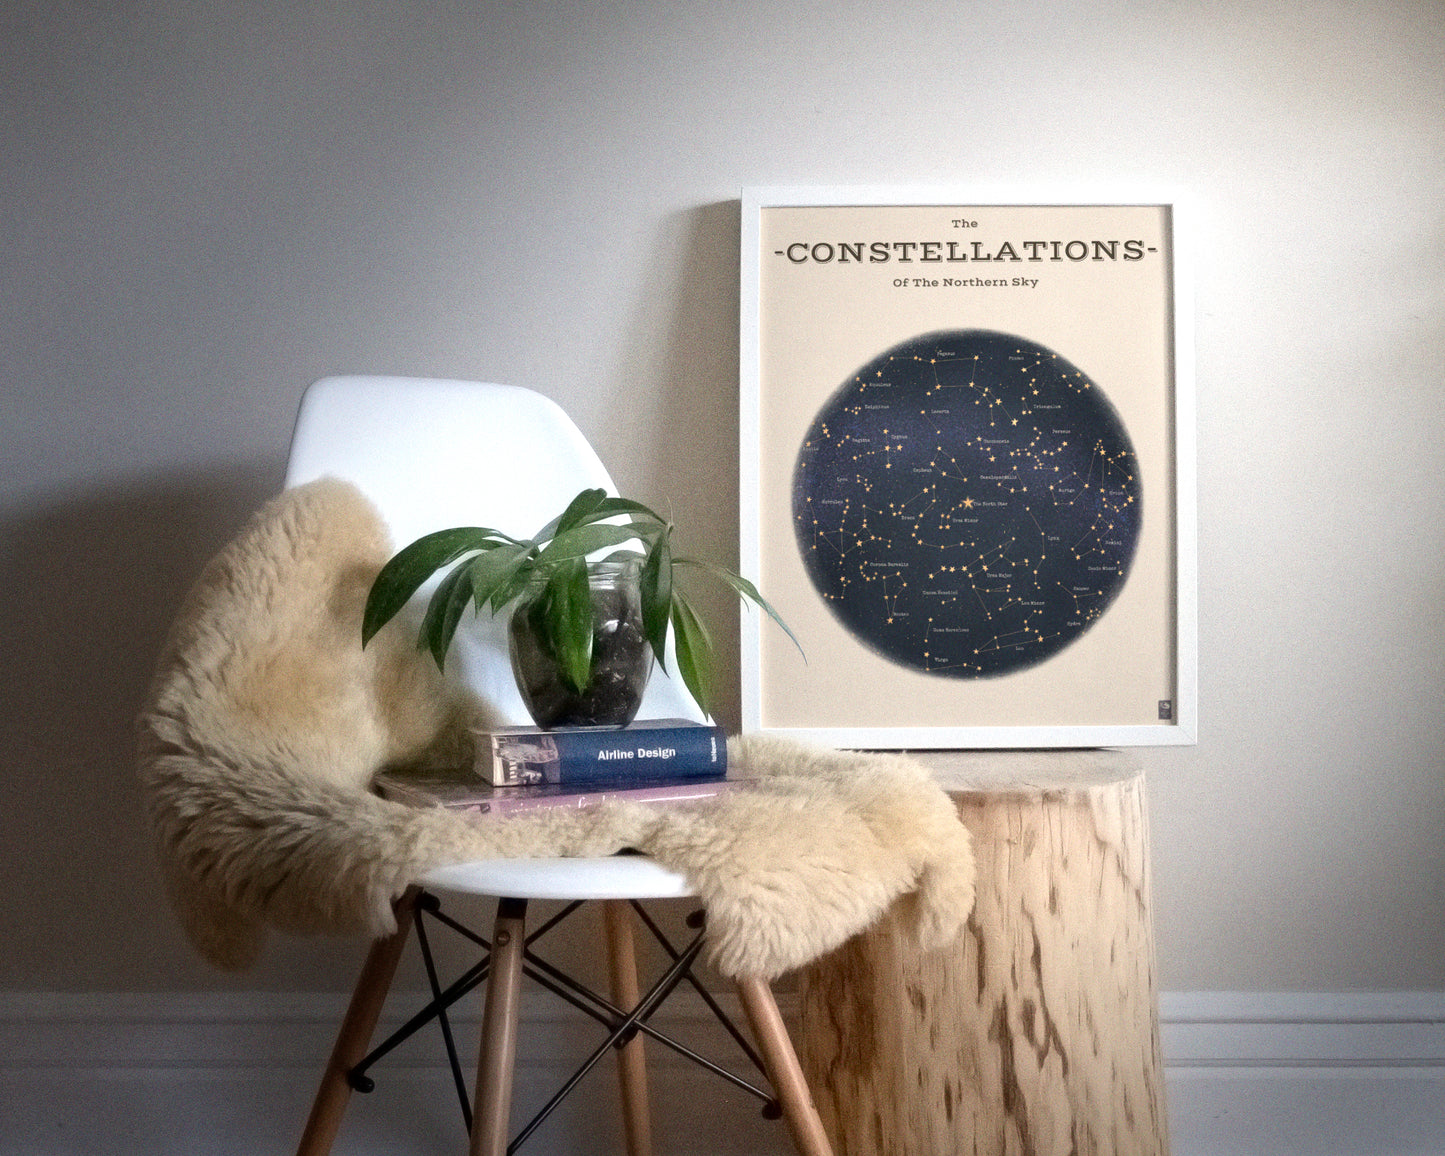 "The Constellations of the  Northern Hemisphere" by Catherine Hébert - Astronomy Star Chart Giclee Art Print